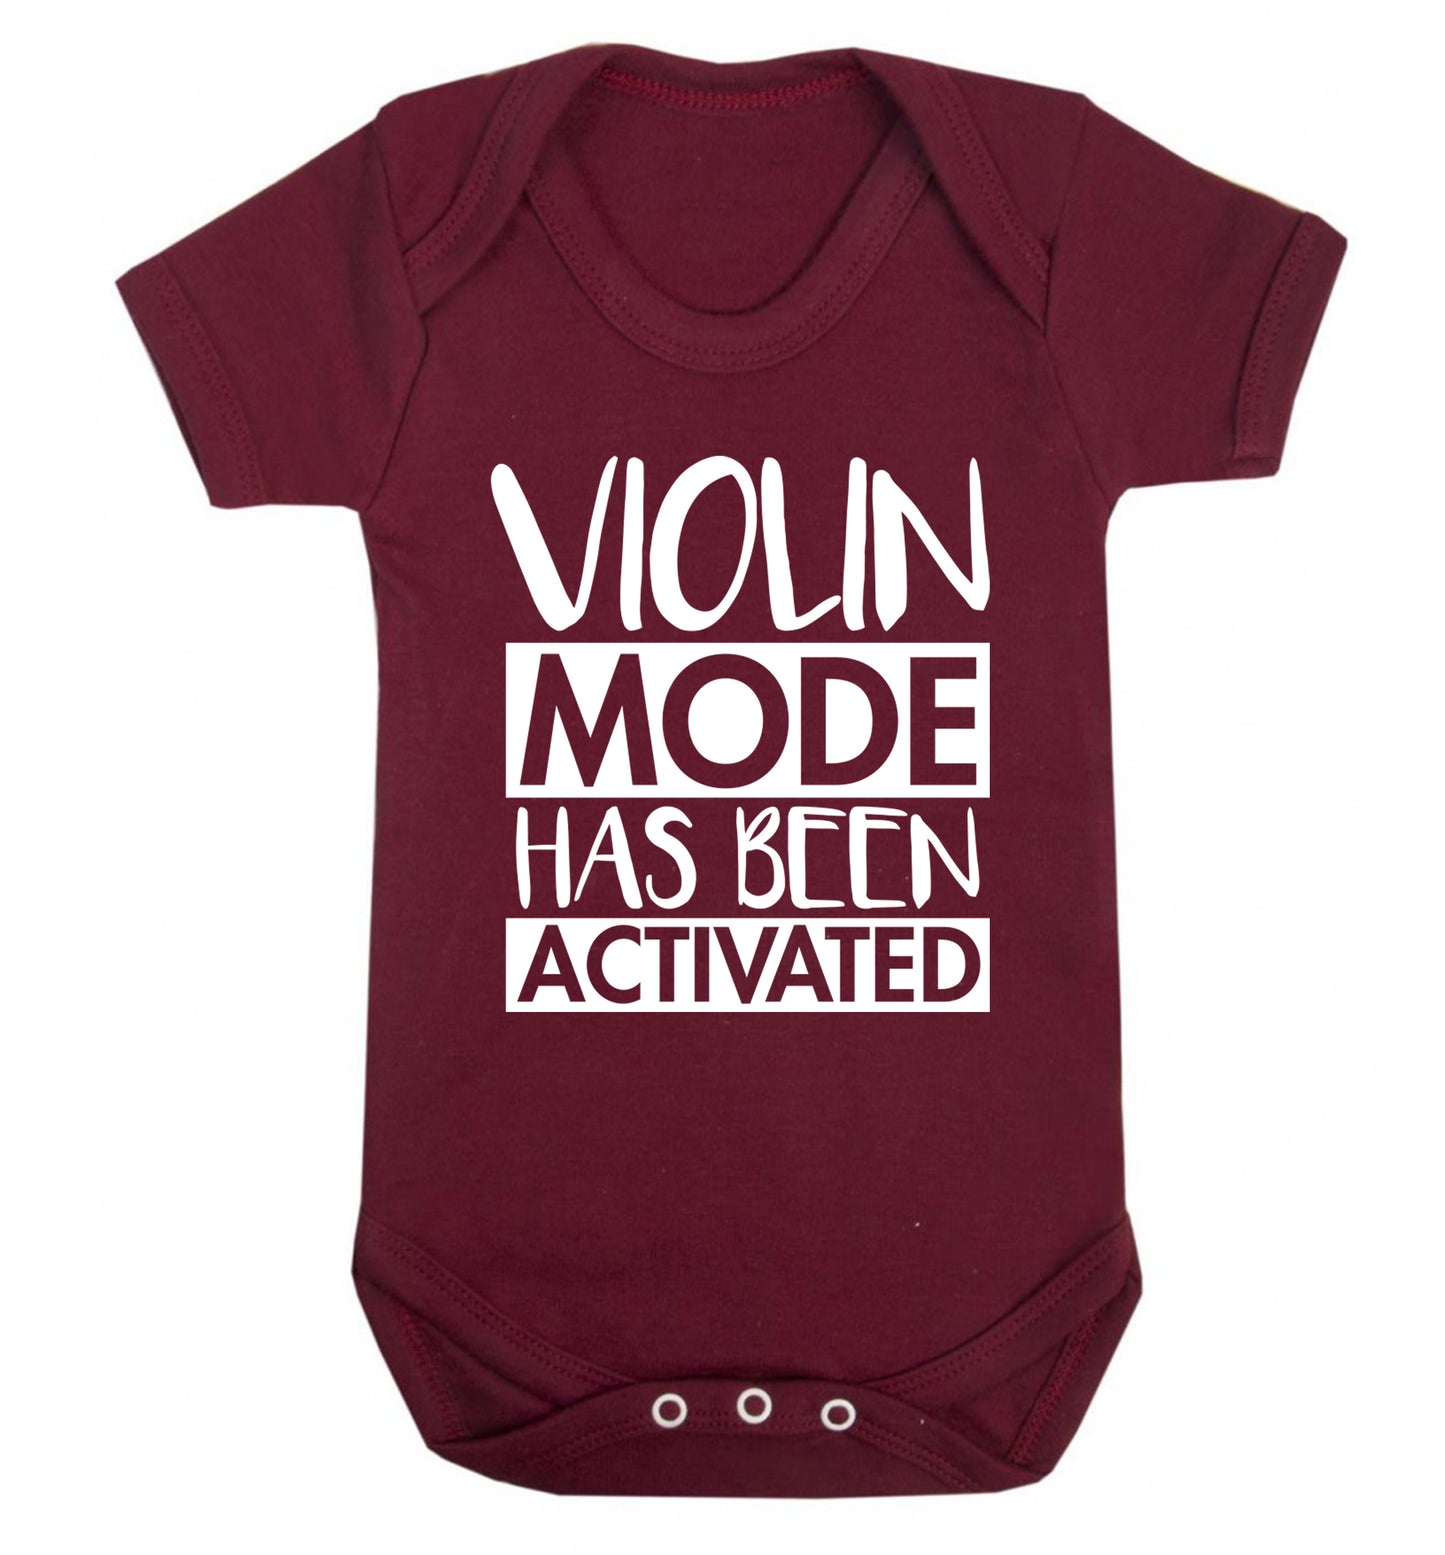 Violin Mode Activated Baby Vest maroon 18-24 months